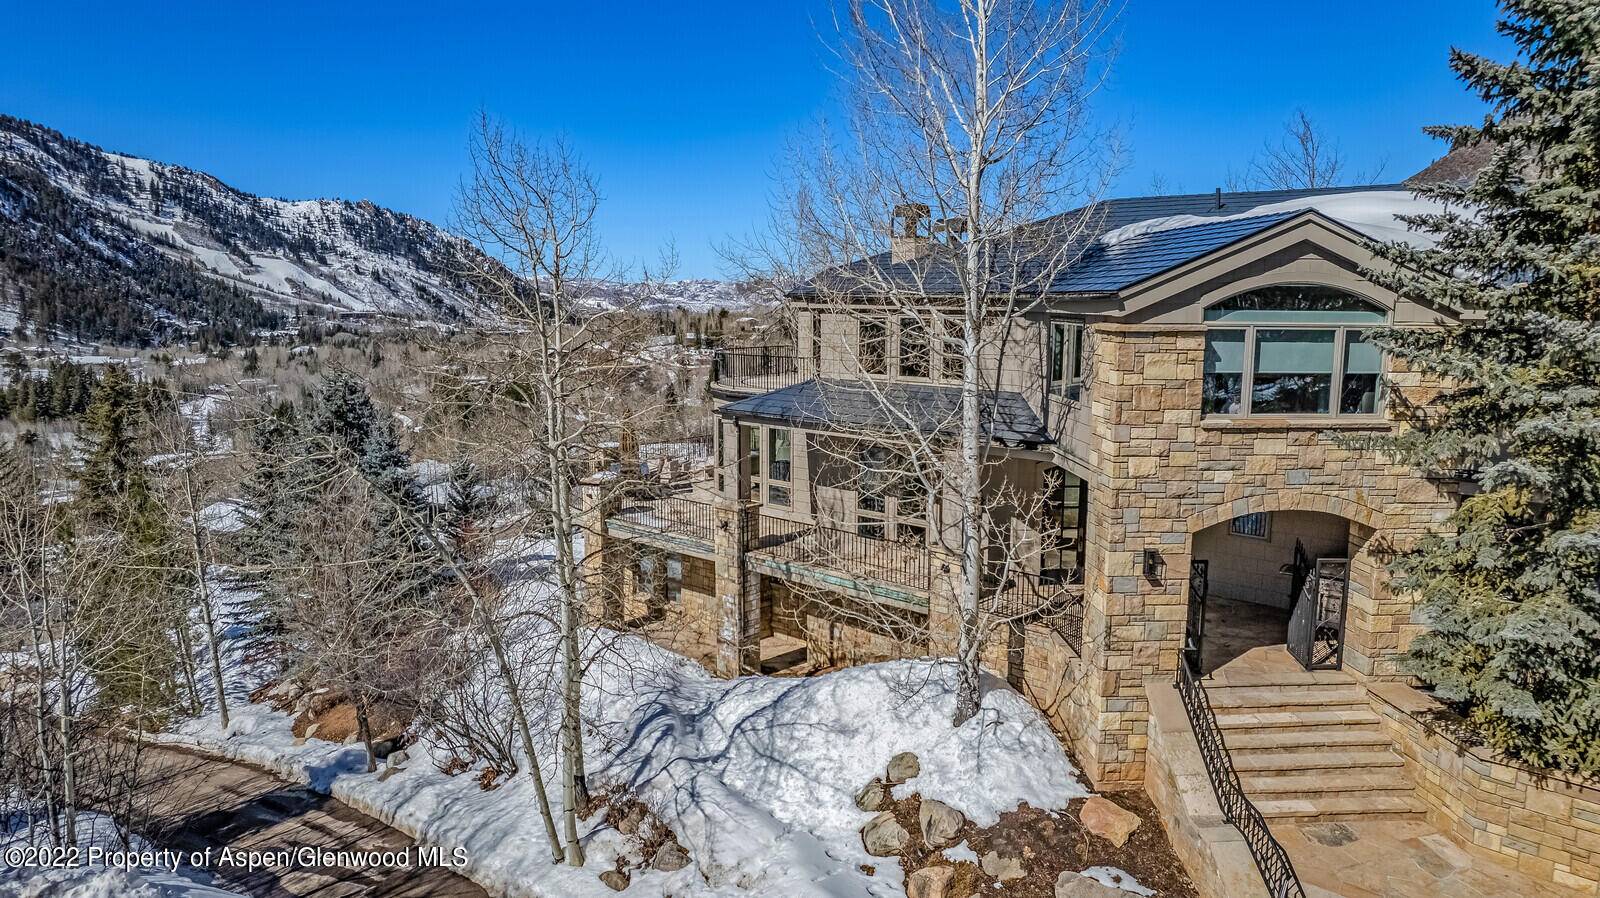 Nestled in a serene aspen grove and surrounded by mature evergreens, this luxurious private mountain estate on one of Mountain Valley's largest lots has spectacular panoramic views spanning across the ...